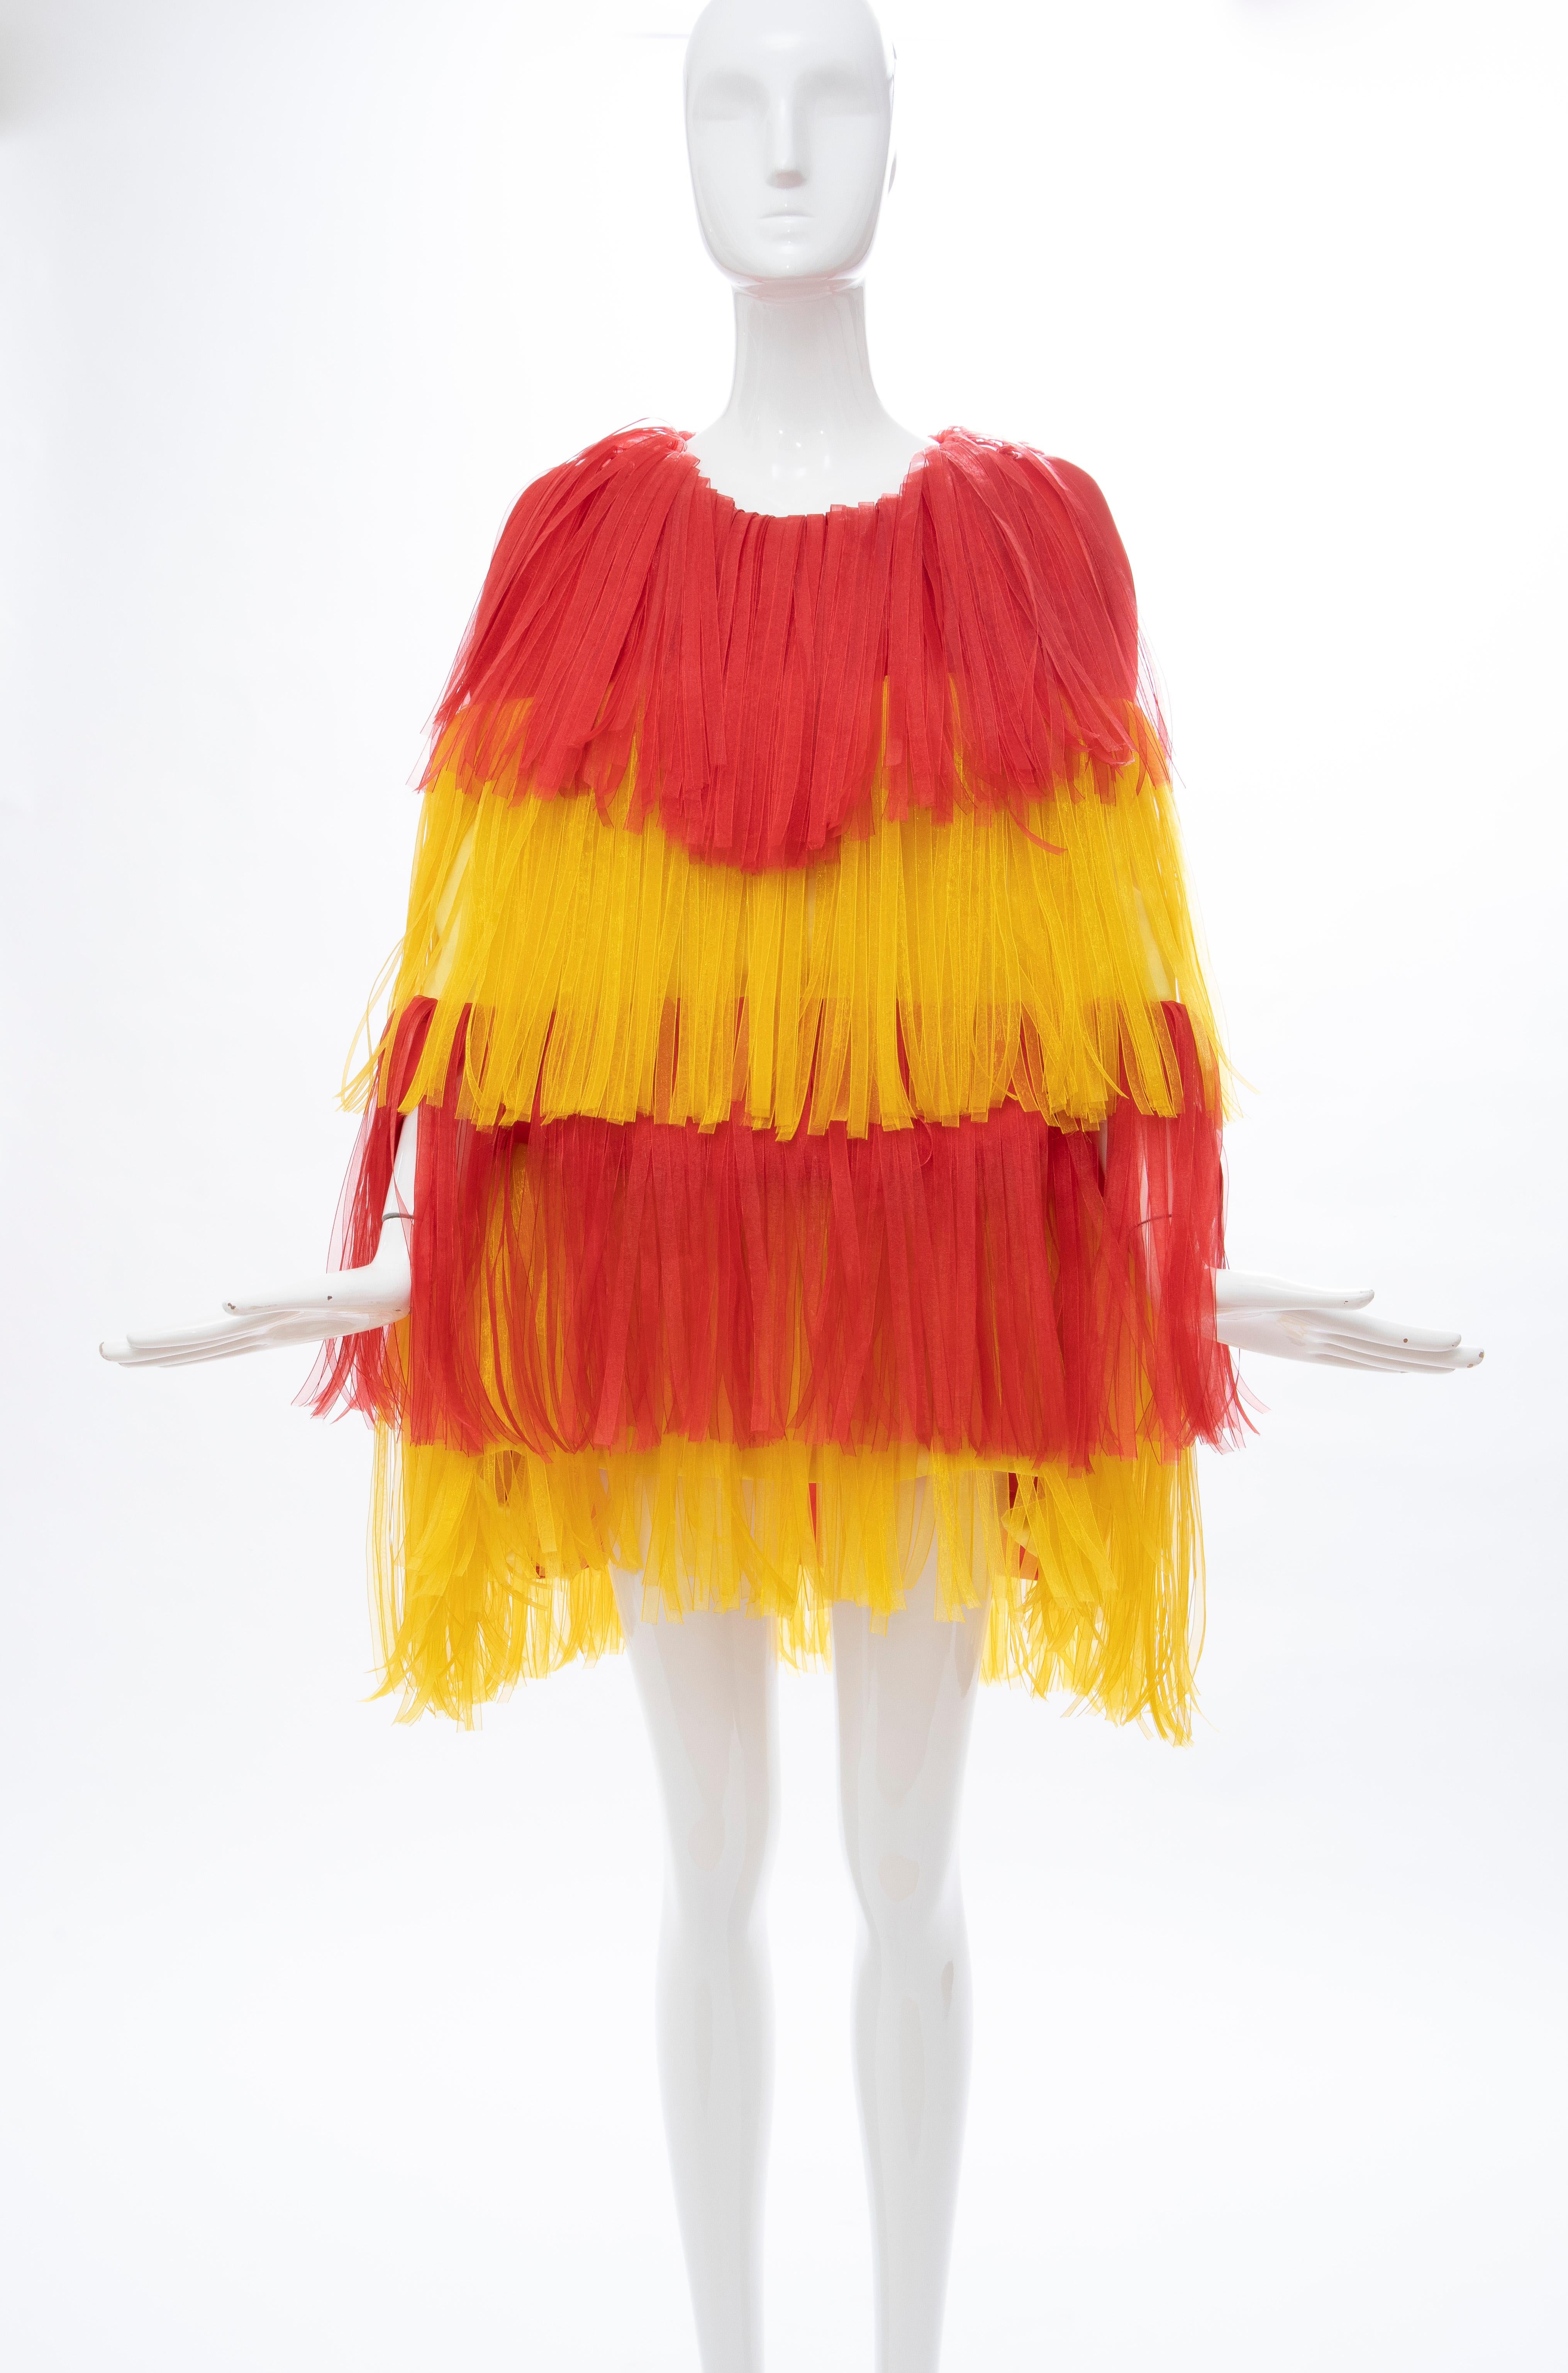 Moschino Couture Runway, (Look 50) Spring 2016, yellow, red silk fringe carwash dress, fully lined.

IT. 40, D. 36, FR. 36, GB. 8, US. 6

Bust: 40, Waist: 46, Hip: 50, Length: 35

Fabric: 100% Silk; Lining 52% Rayon, 48% Acetate; Combo 100% Nylon